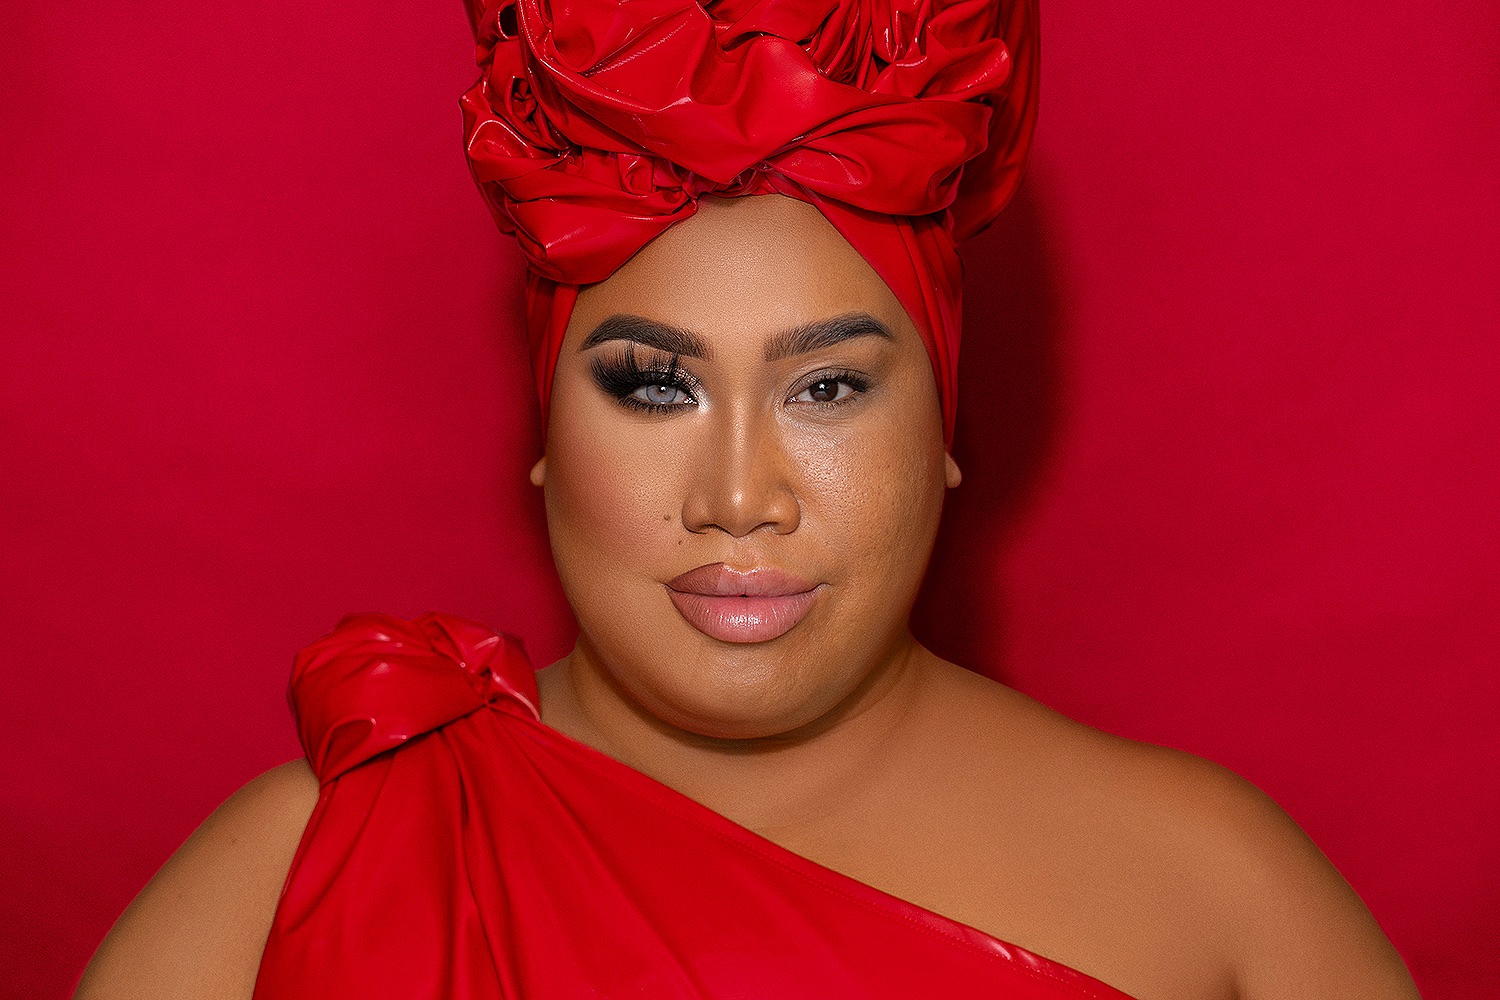 Patrick Starrr lance le Maquillage One size fits all – #onesizebeauty